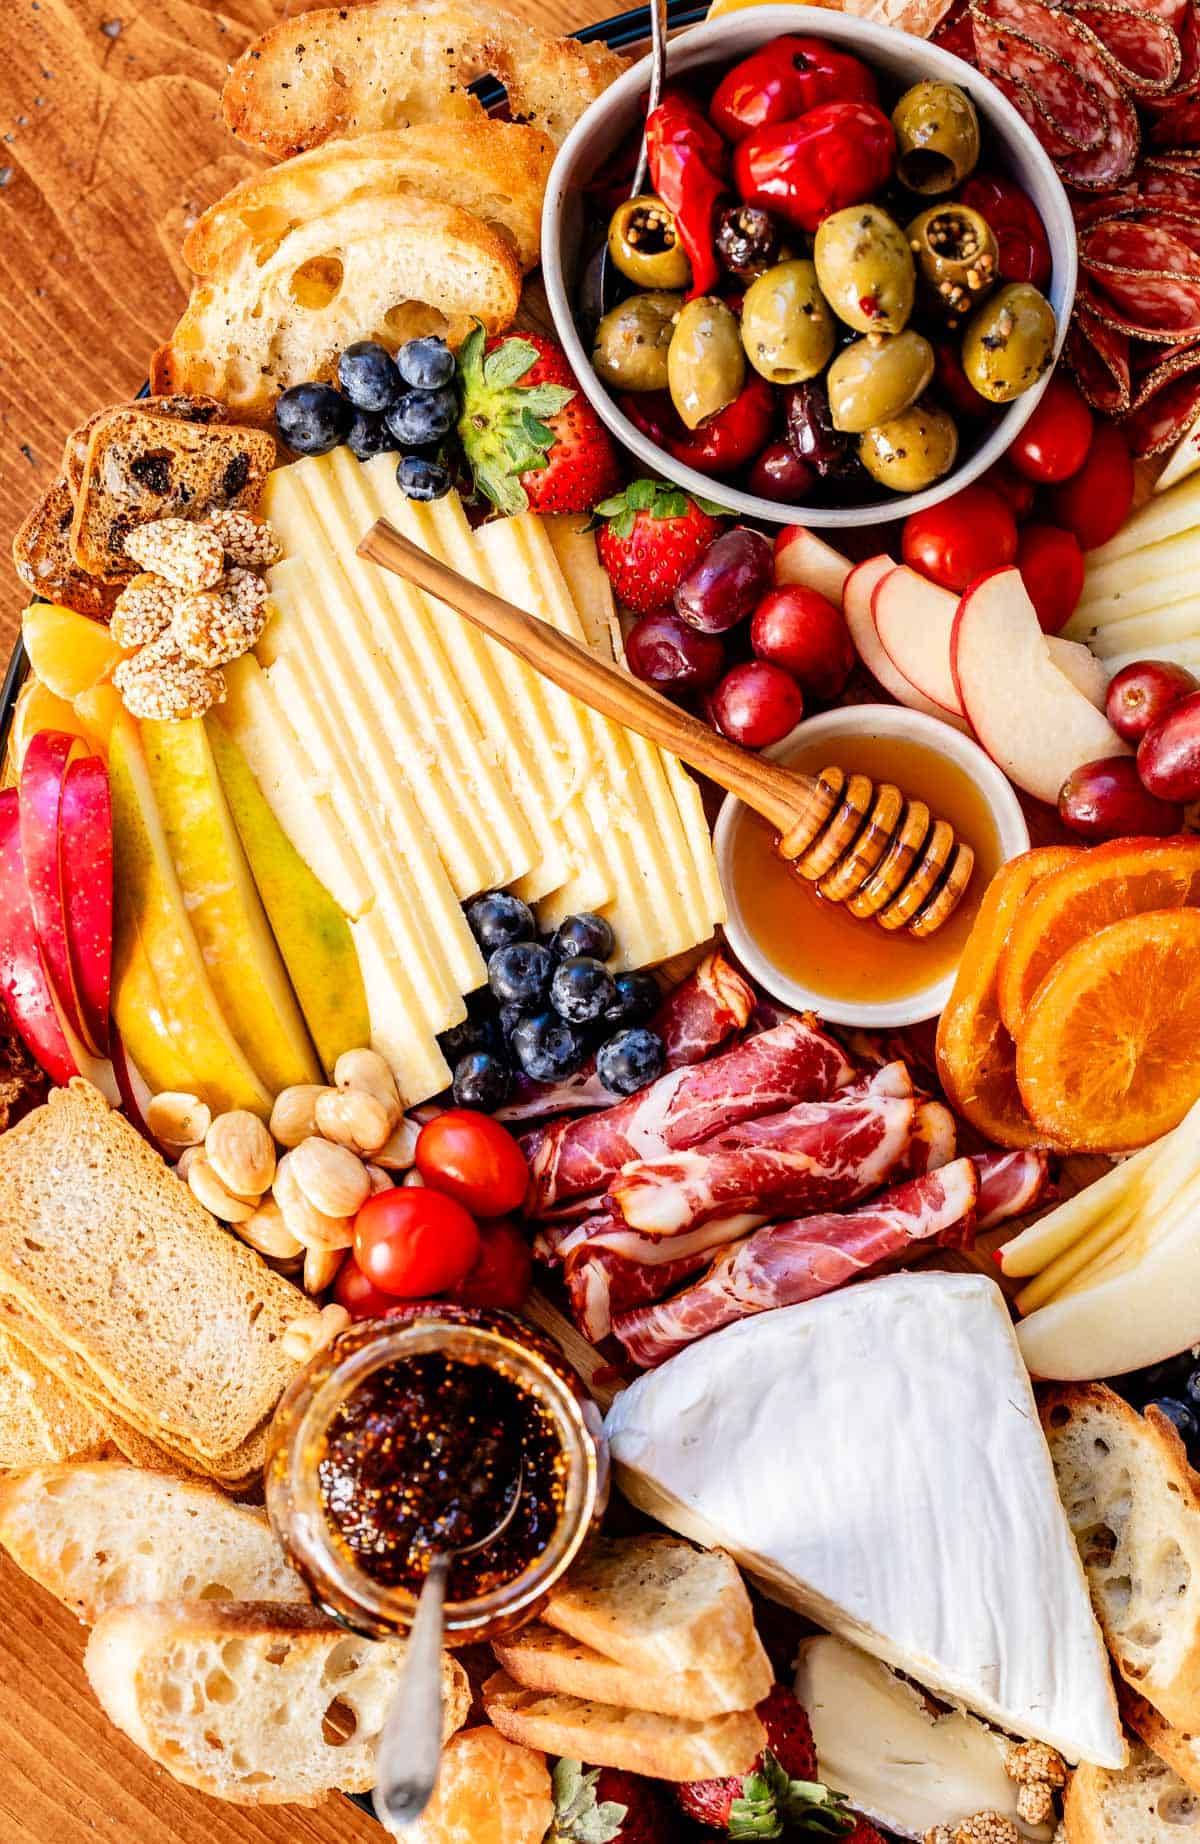 Picture of a charcuterie board with cheese, meat, fruits, honey, oranges, blueberries, etc.